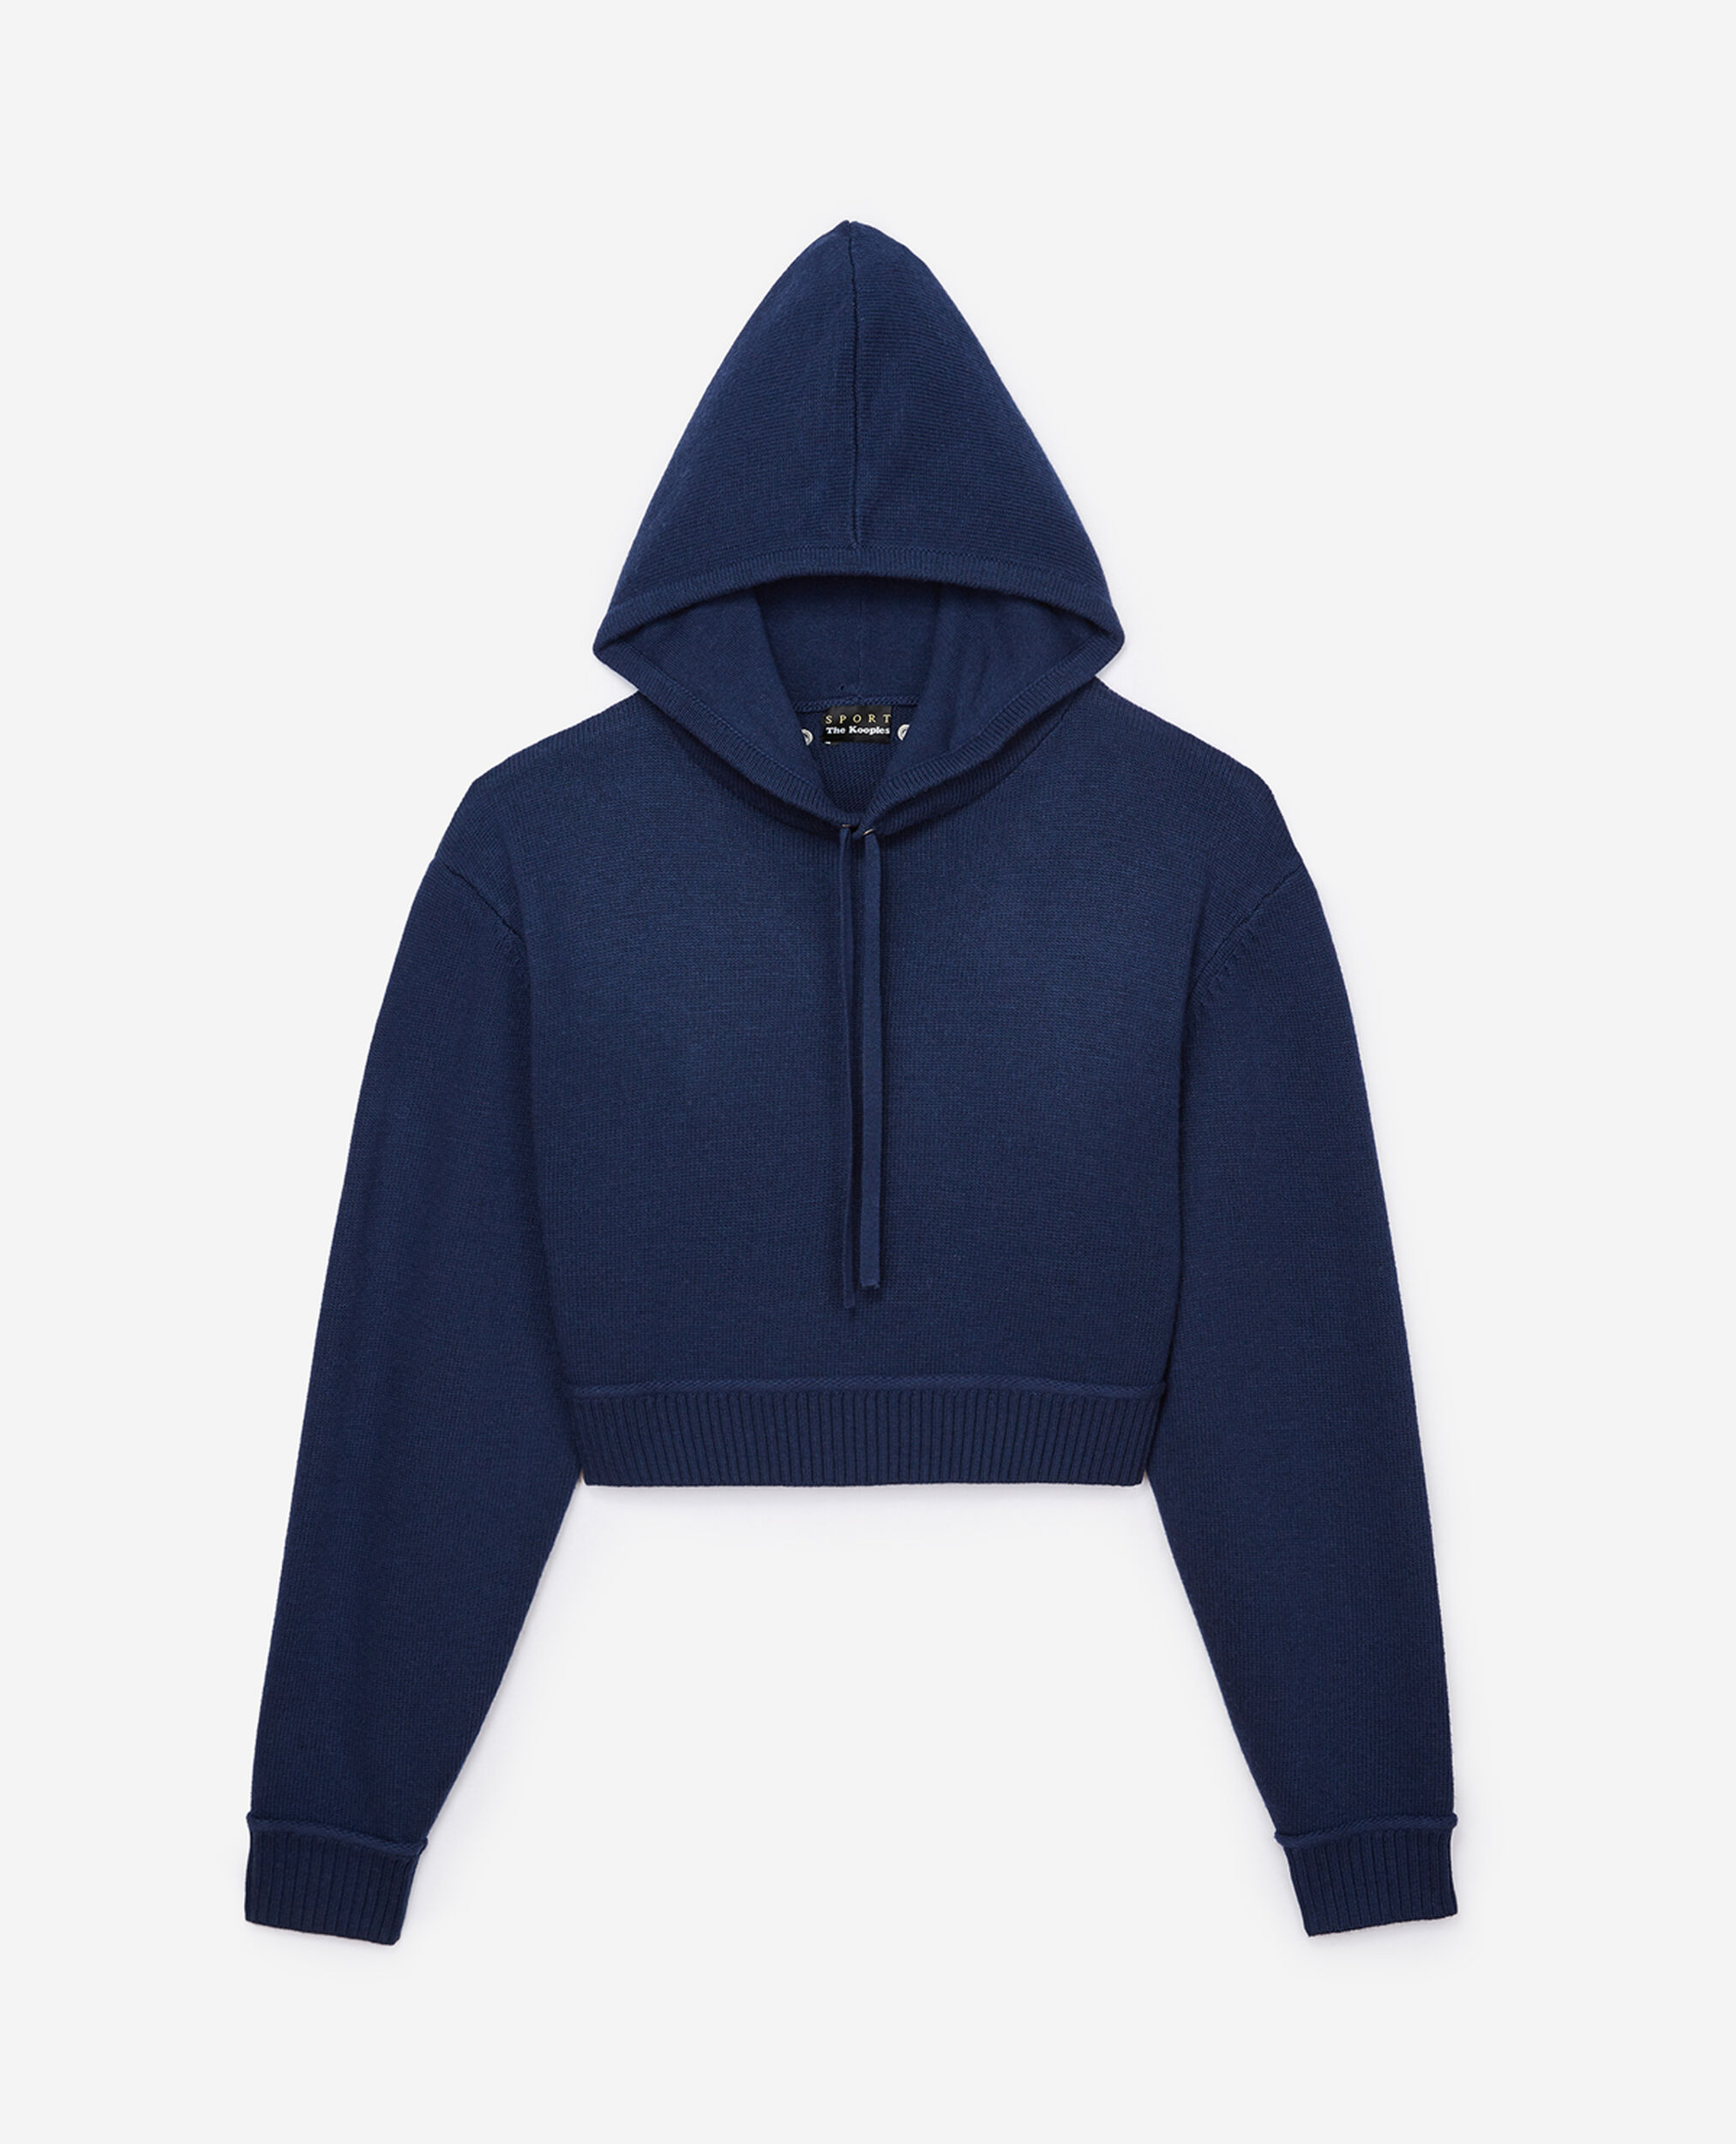 Cropped navy blue sweater with hood, NAVY, hi-res image number null